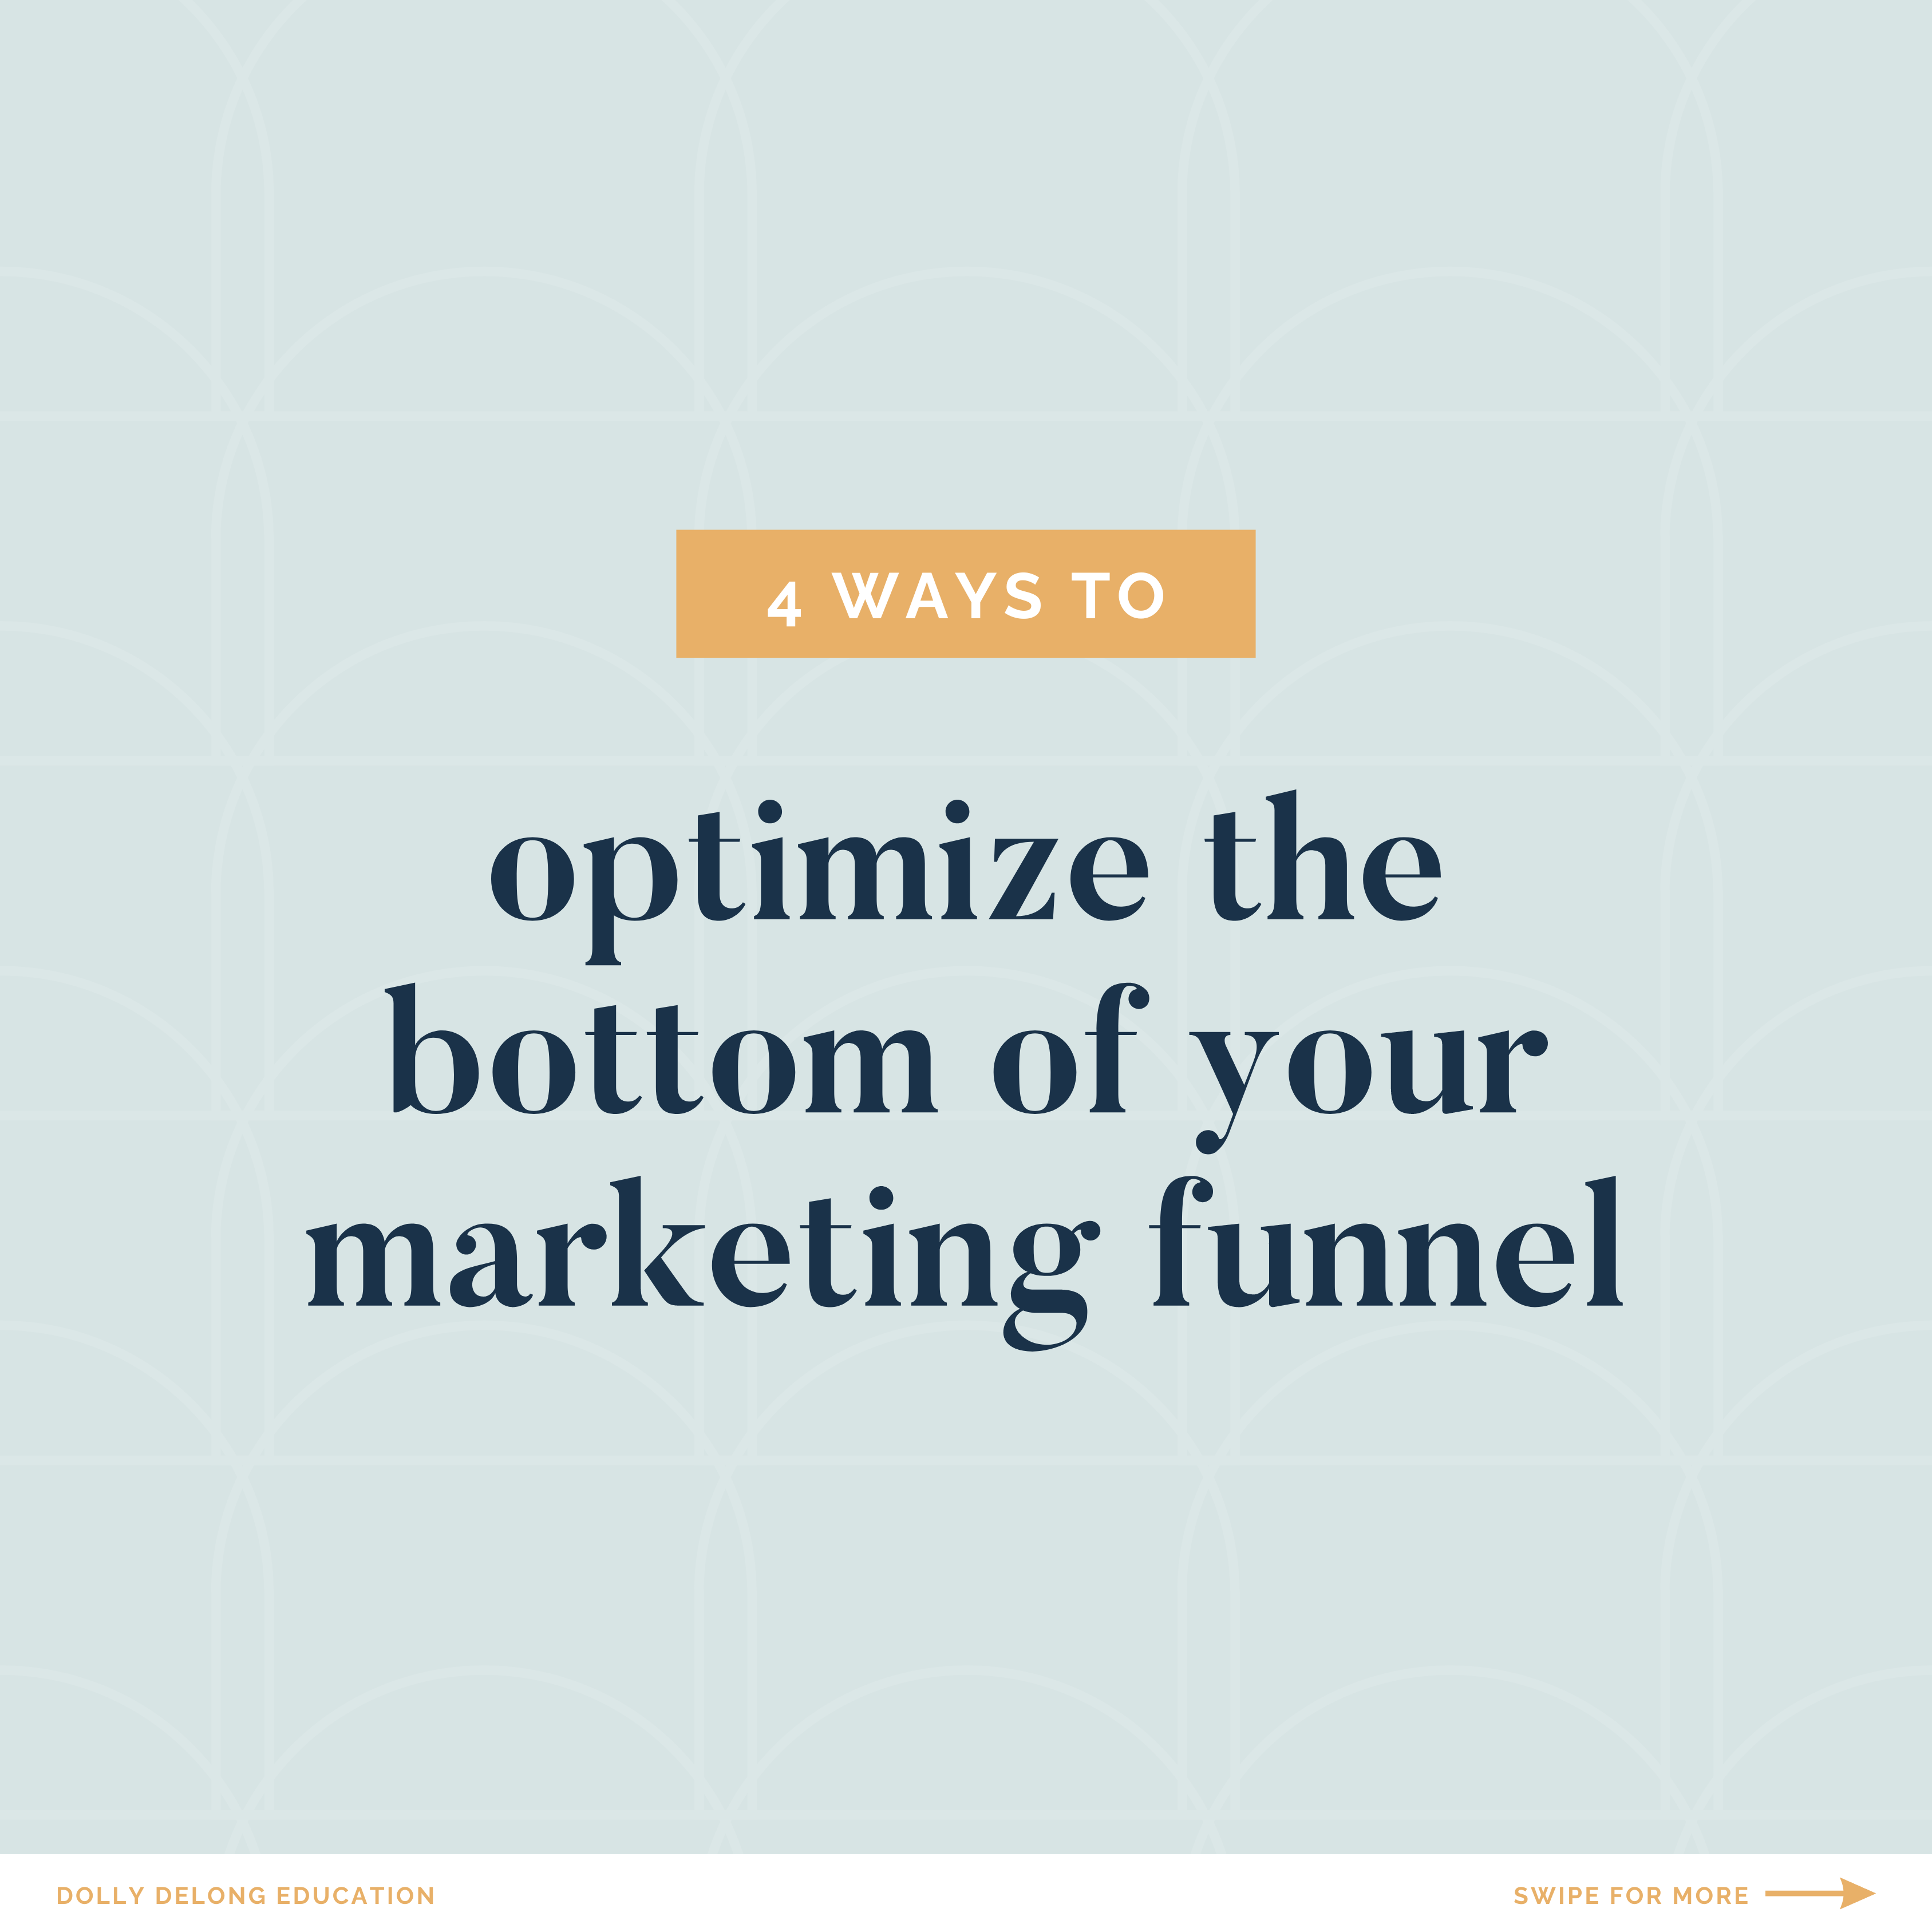 4_ways_to_optimize_the_bottom_of_your_marketing_funnel